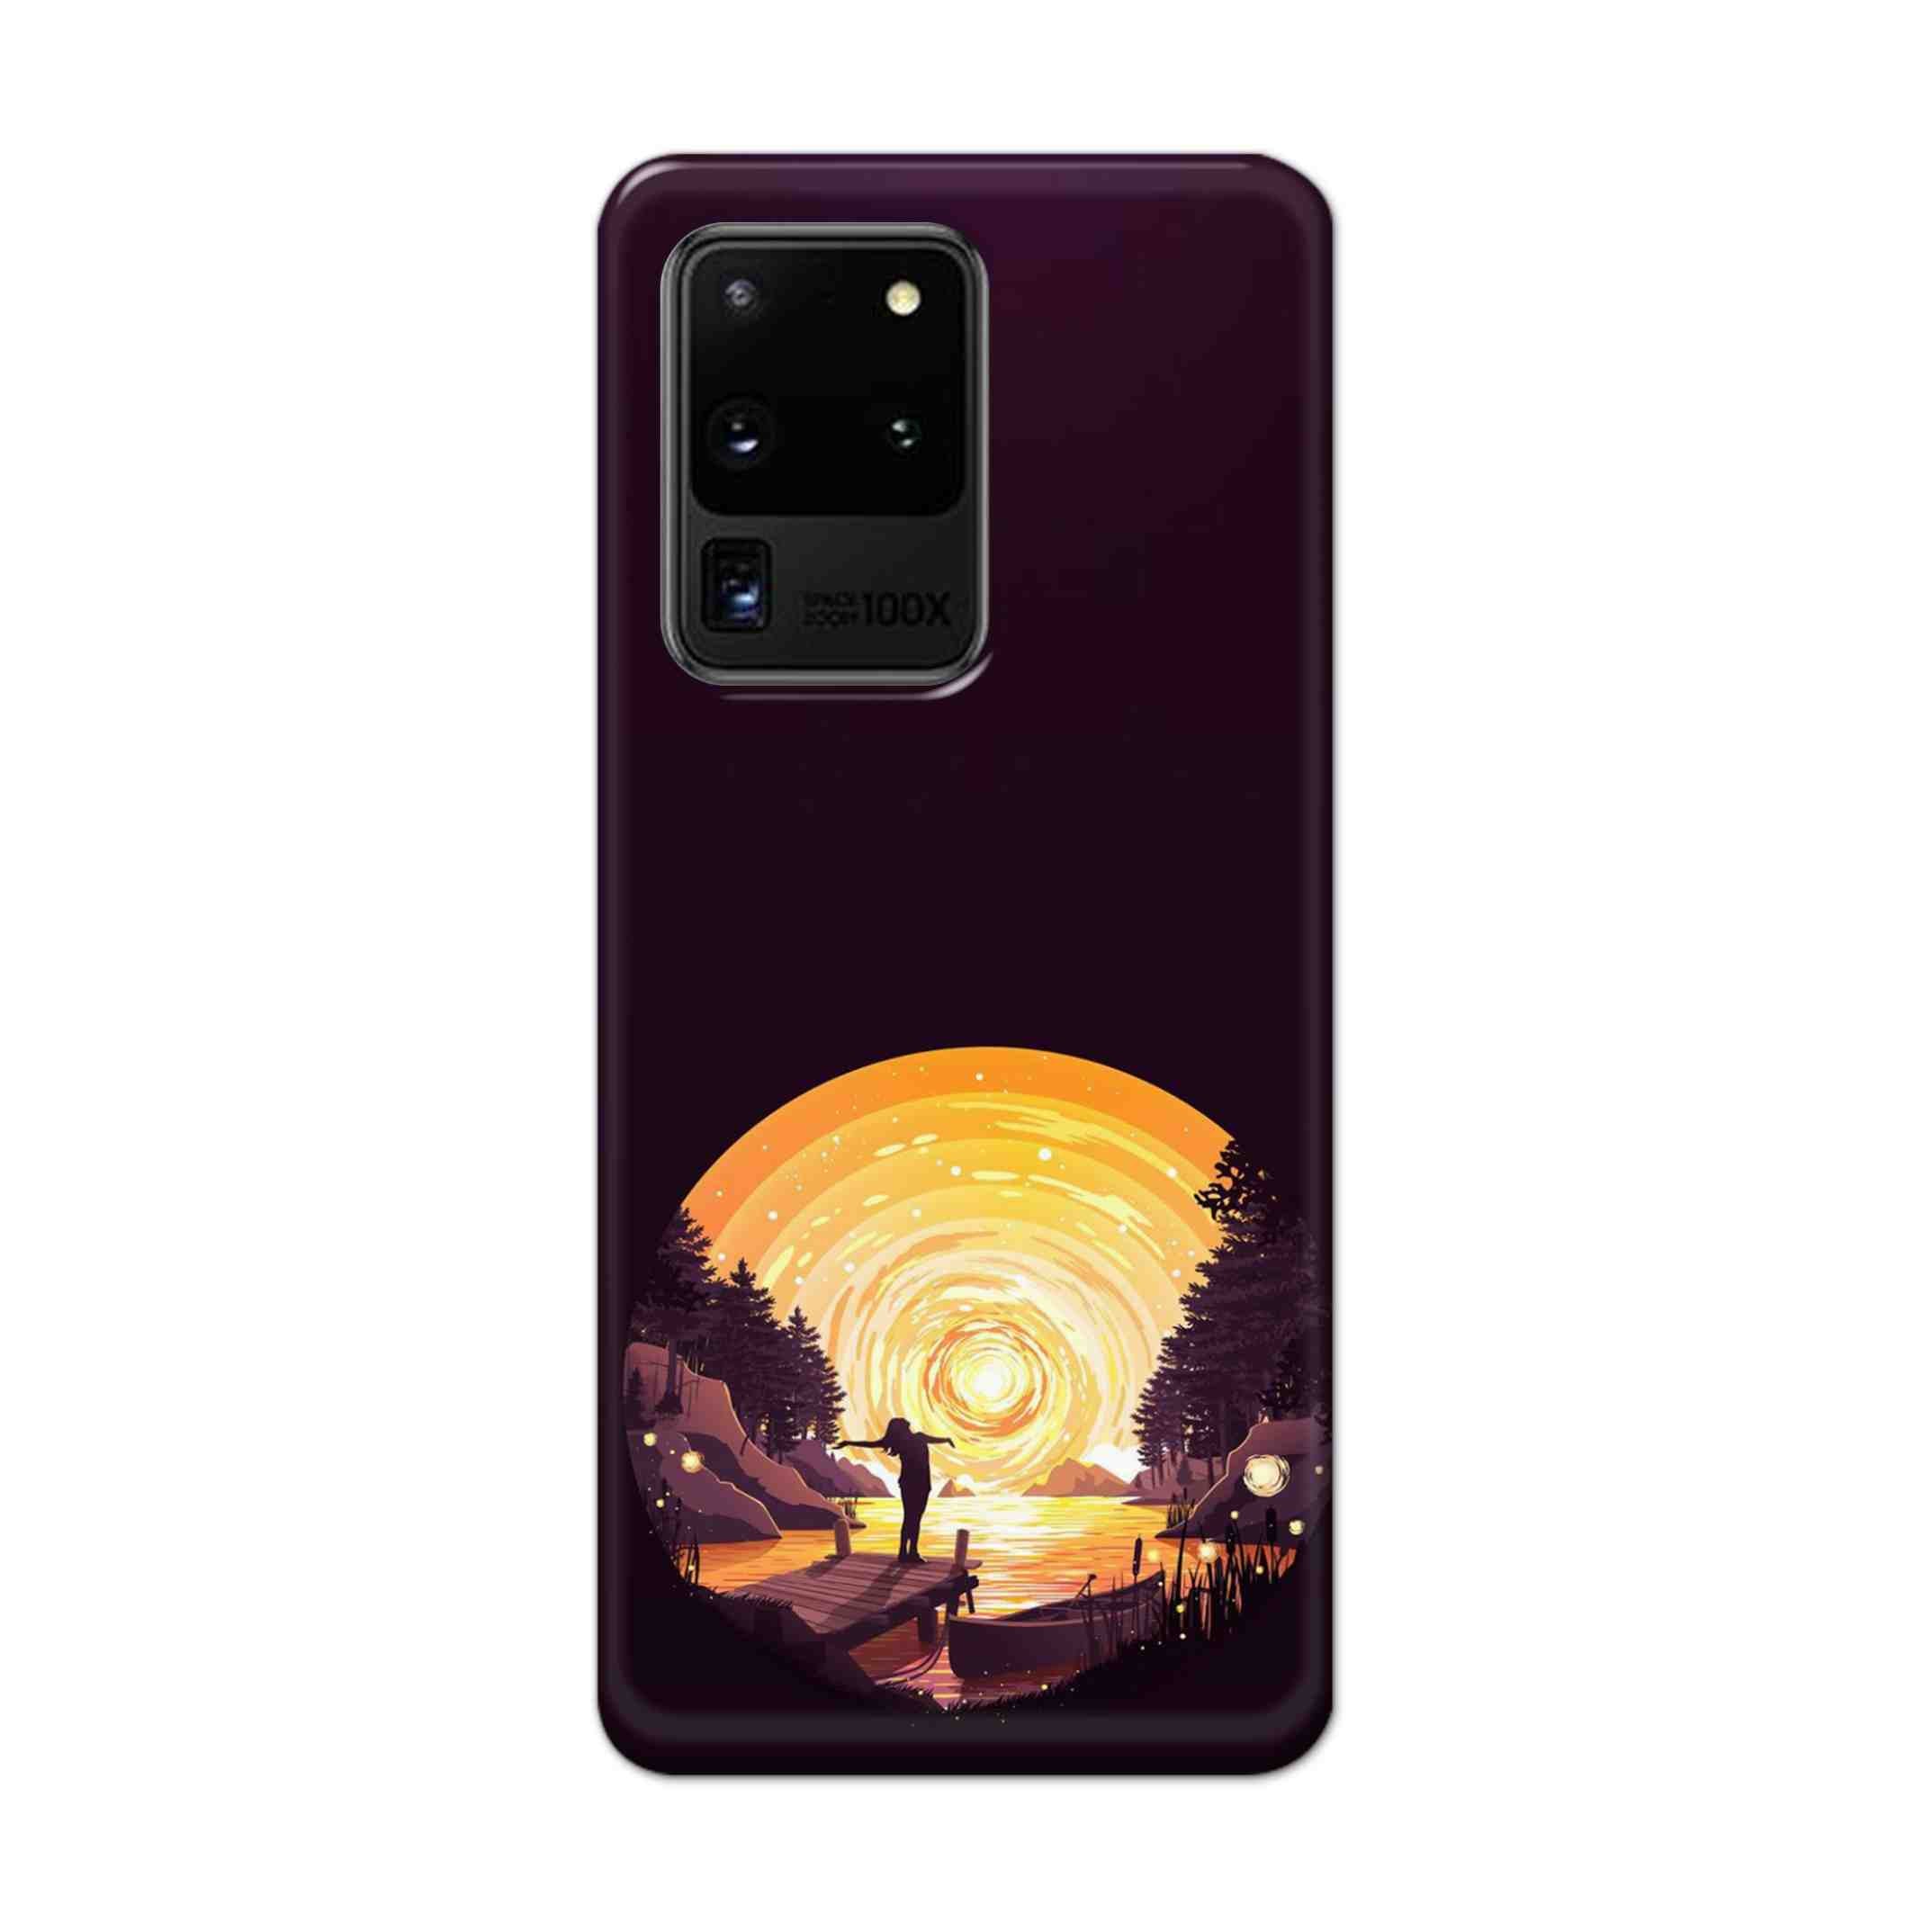 Buy Night Sunrise Hard Back Mobile Phone Case Cover For Samsung Galaxy S20 Ultra Online